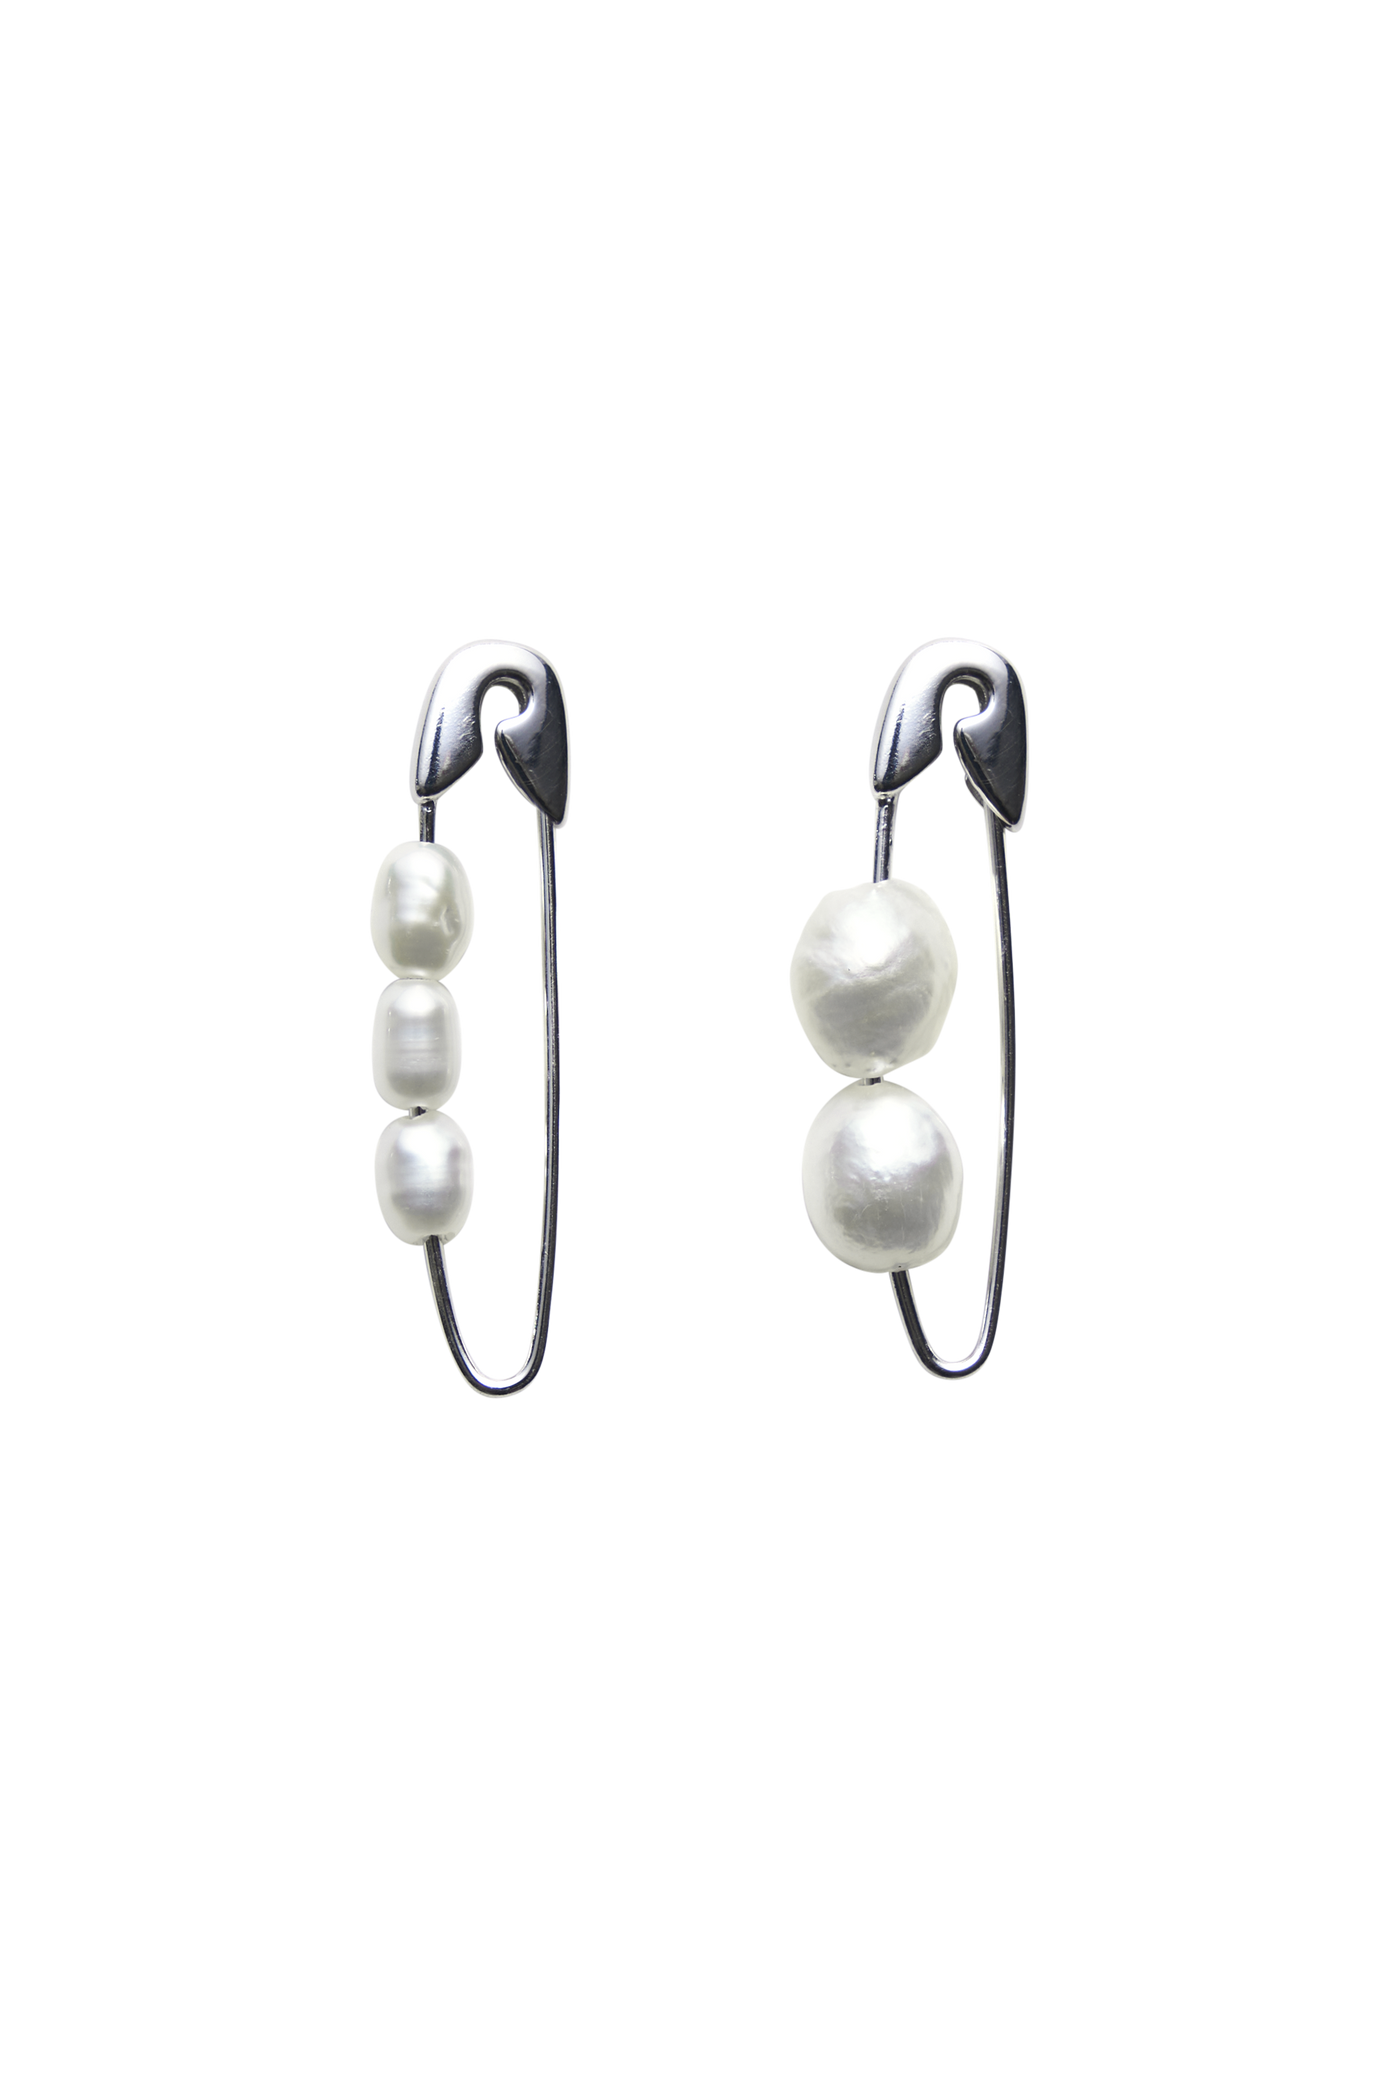 Bianca Mavrick Jewellery Safety Pin Earring Sterling Silver Mismatched Pearls Closed